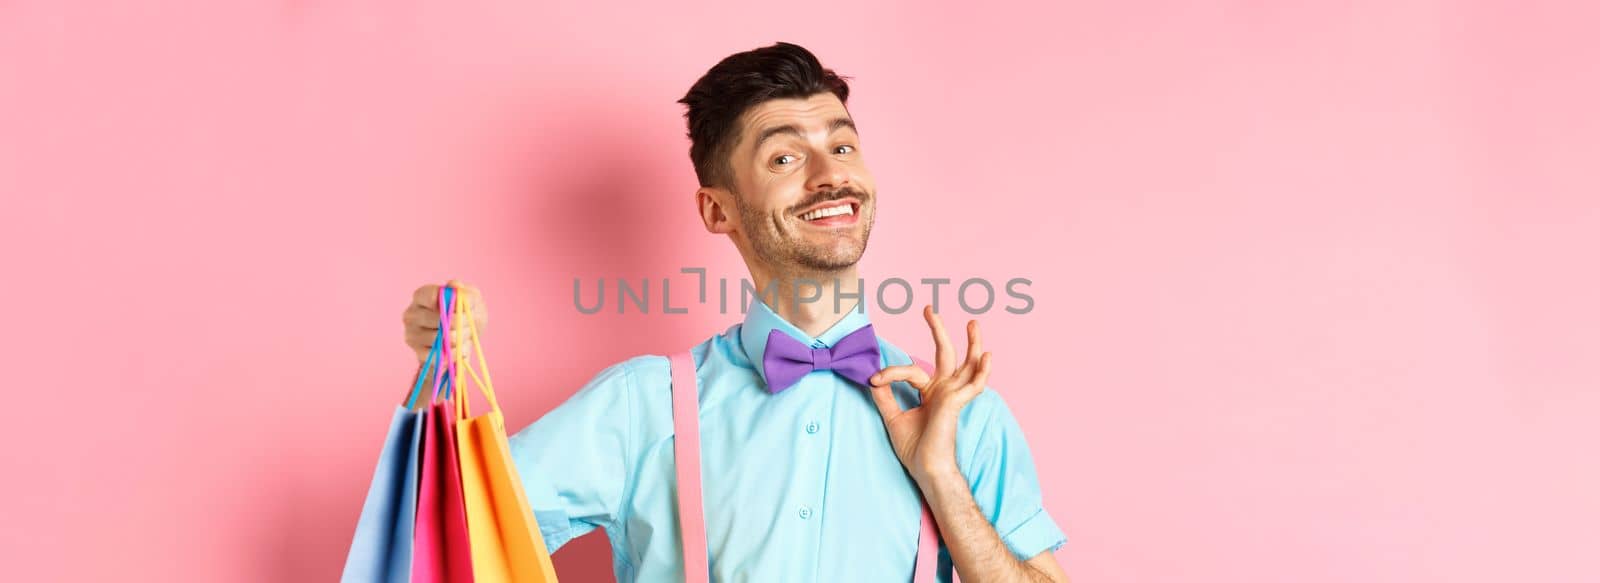 Confident smiling guy adjusting his bow-tie and showing gifts in shopping bags, looking happy, standing over pink background by Benzoix